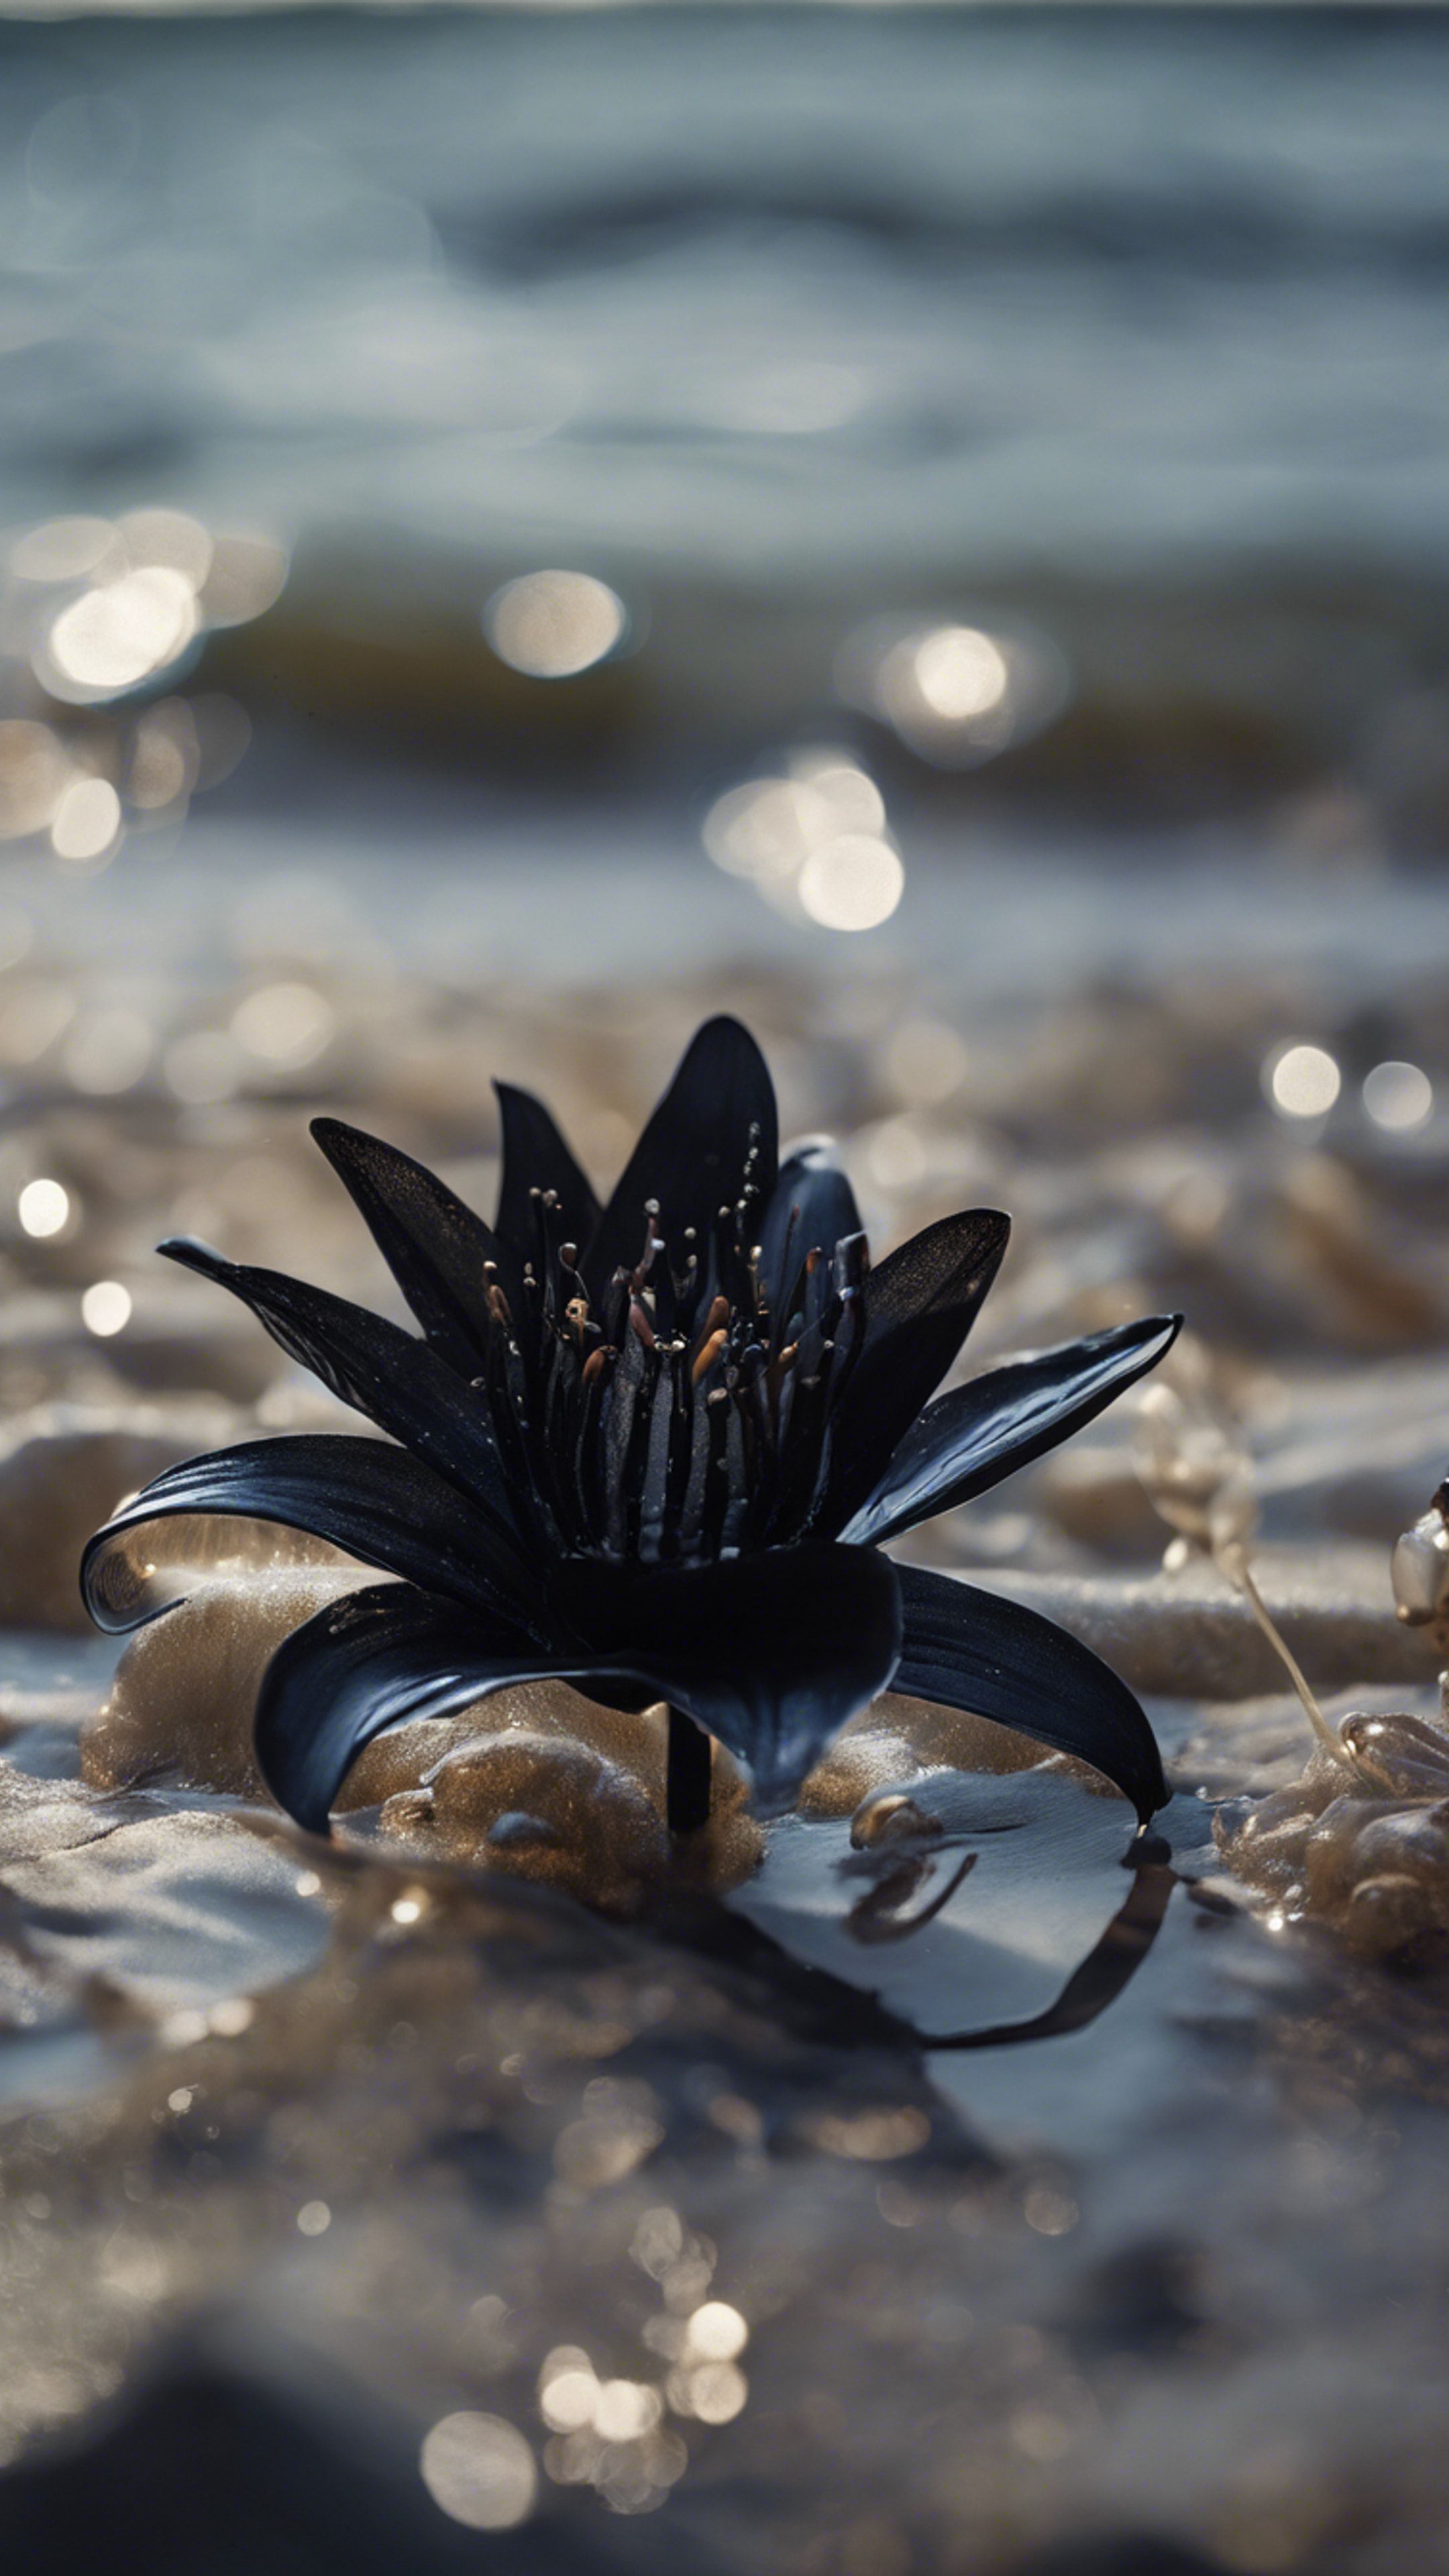 A black lily hiding under the tide, revealed only when the ocean pulls away, revealing the dark secrets of the sea bed.壁紙[3833c30c18c941348380]